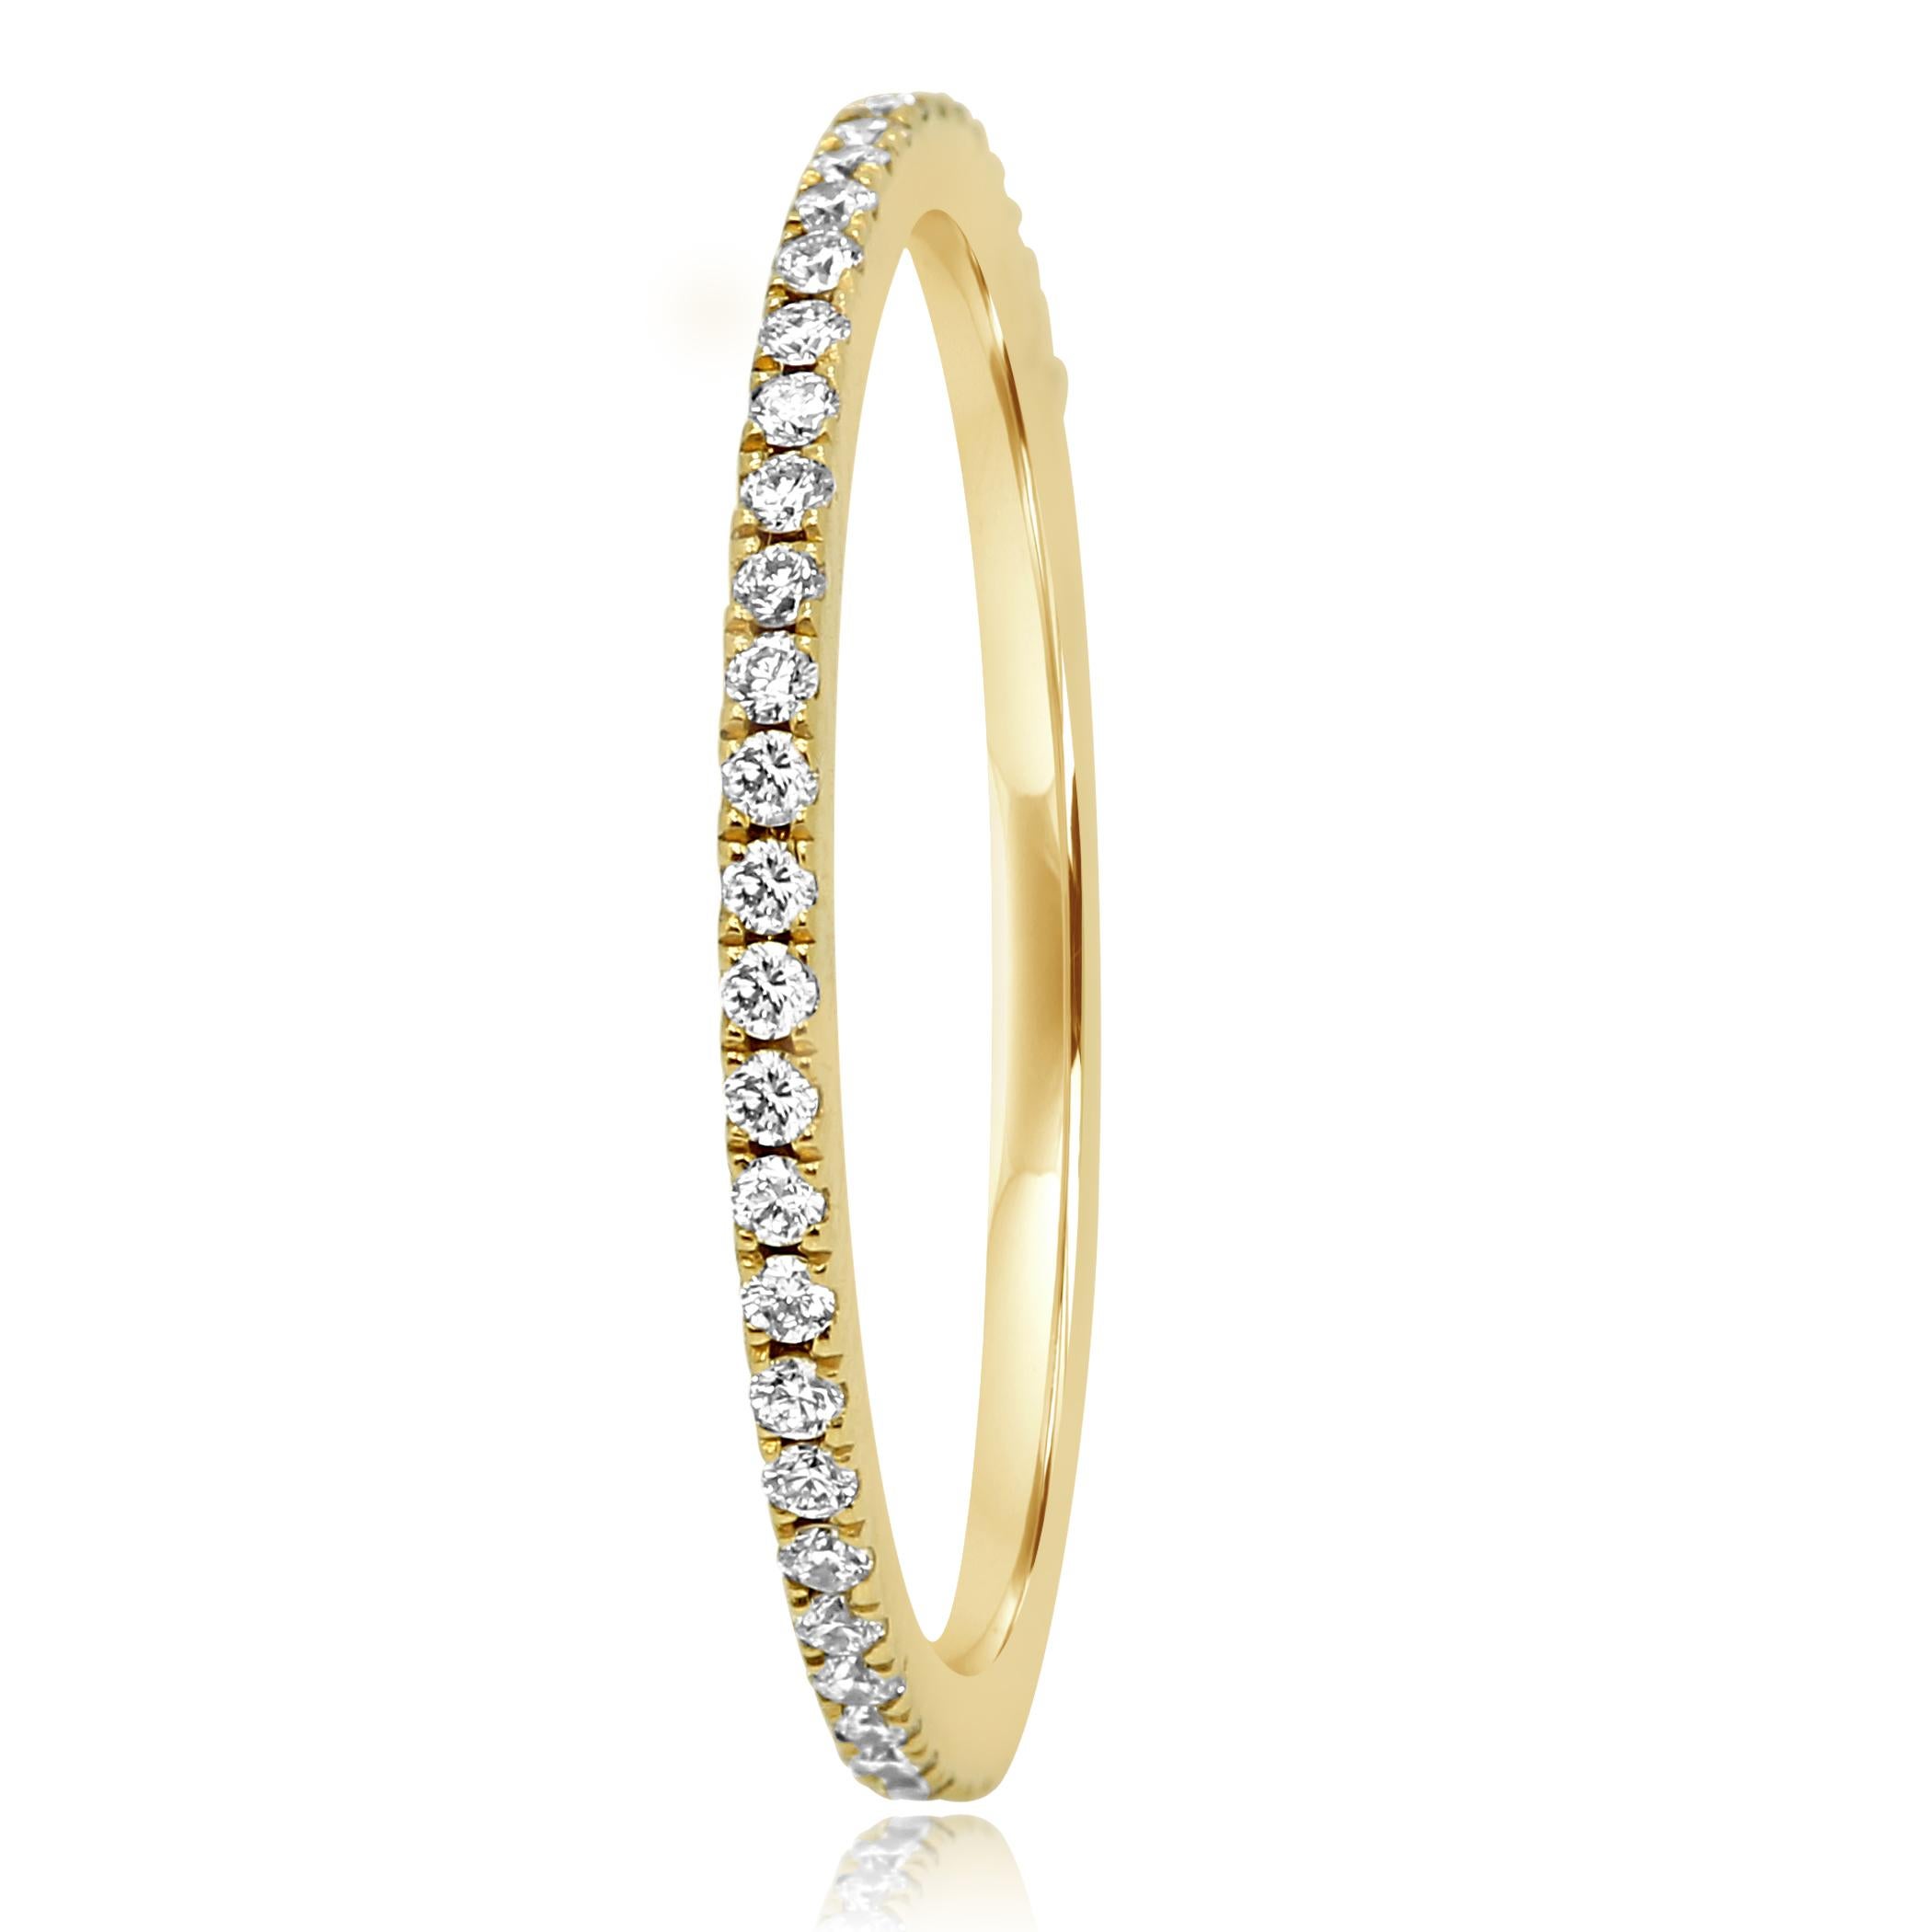 Classic White Diamond Round 0.30 Carat in 14K Yellow Gold Band Ring. Can be worn as Wedding Band or Stackable or fashion everyday ring.

Total Weight 0.30 Carat
Can be customized in all the ring sizes and Gold Color.